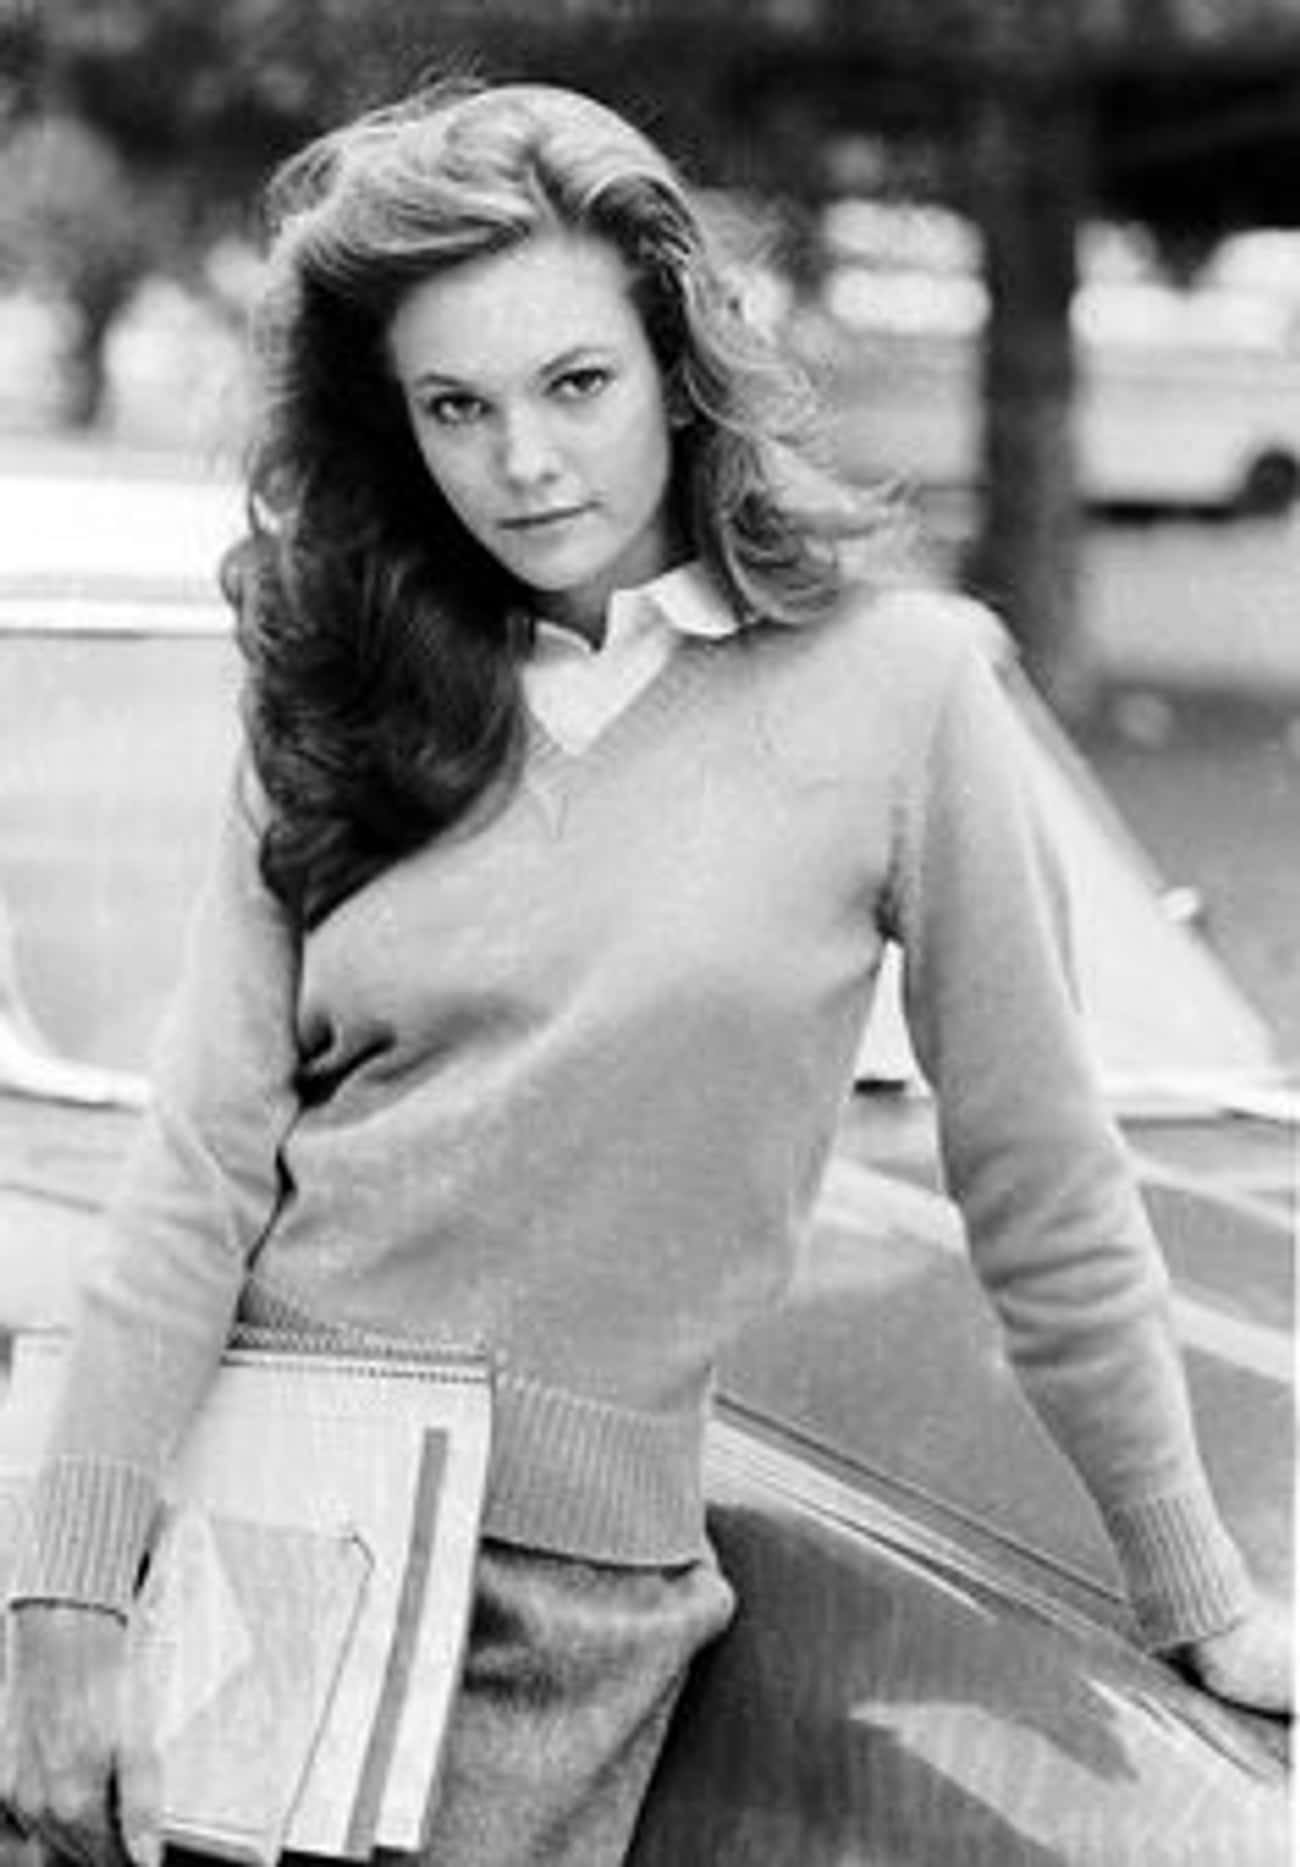 Young Diane Lane in Gray Sweater with White Buttondown Shirt